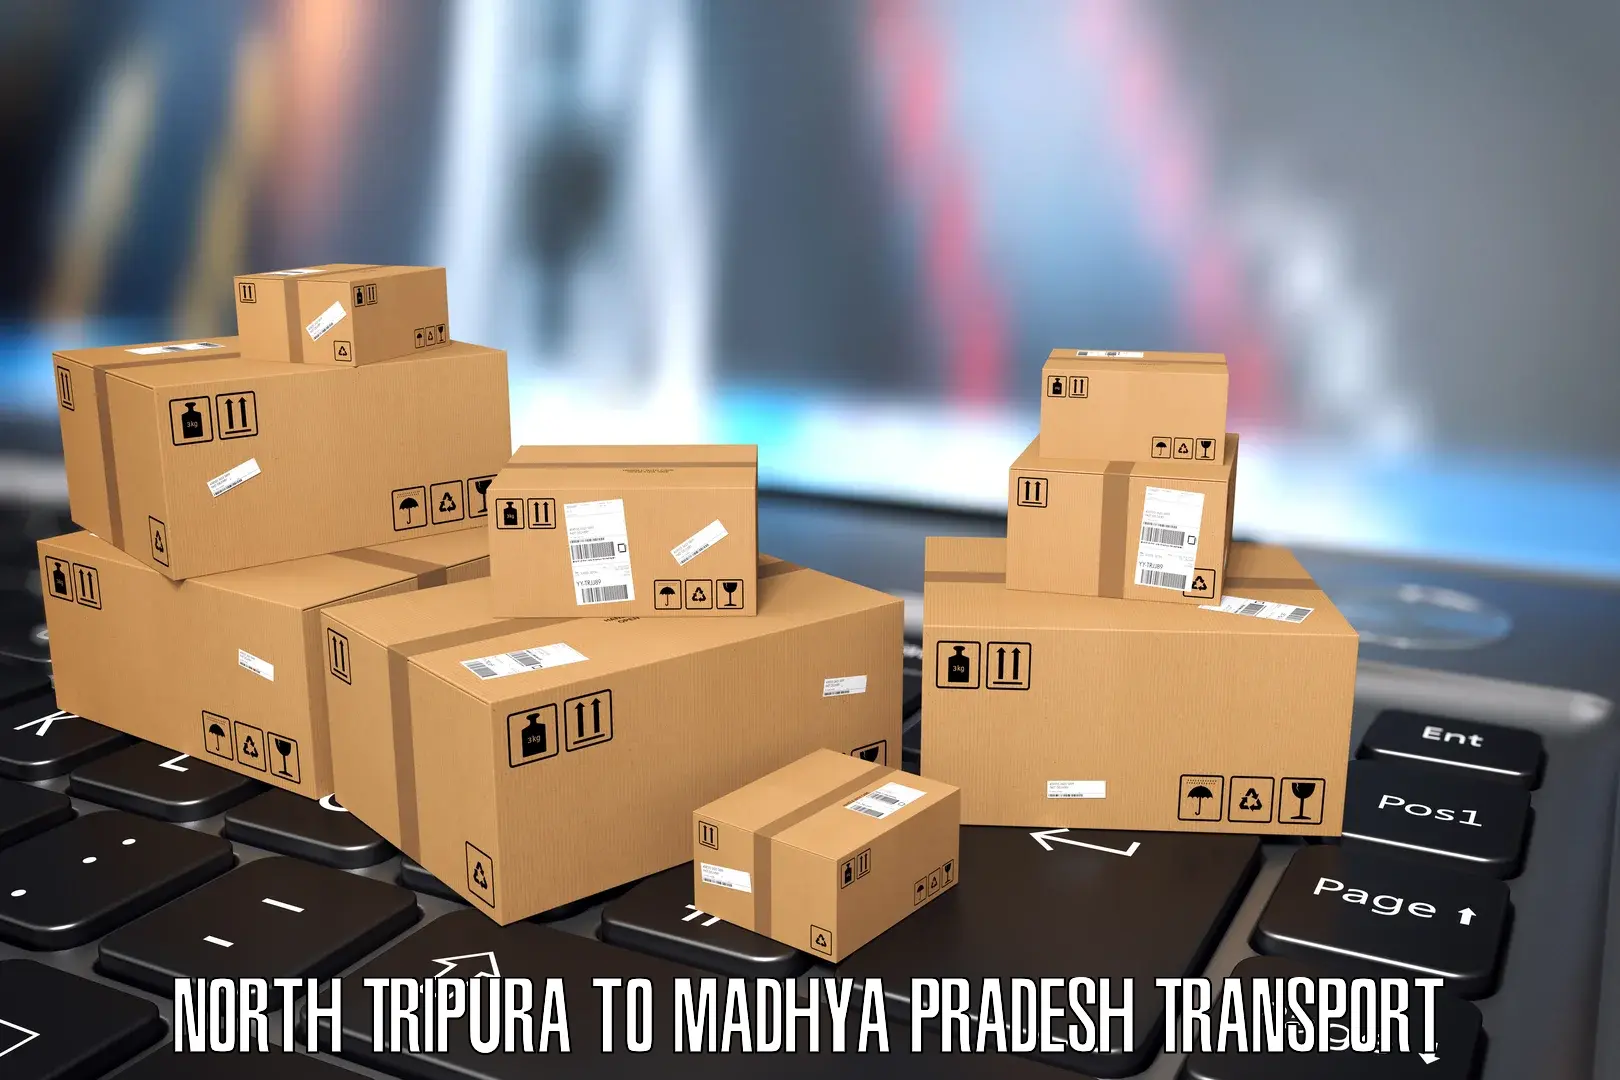 Goods delivery service North Tripura to Indore